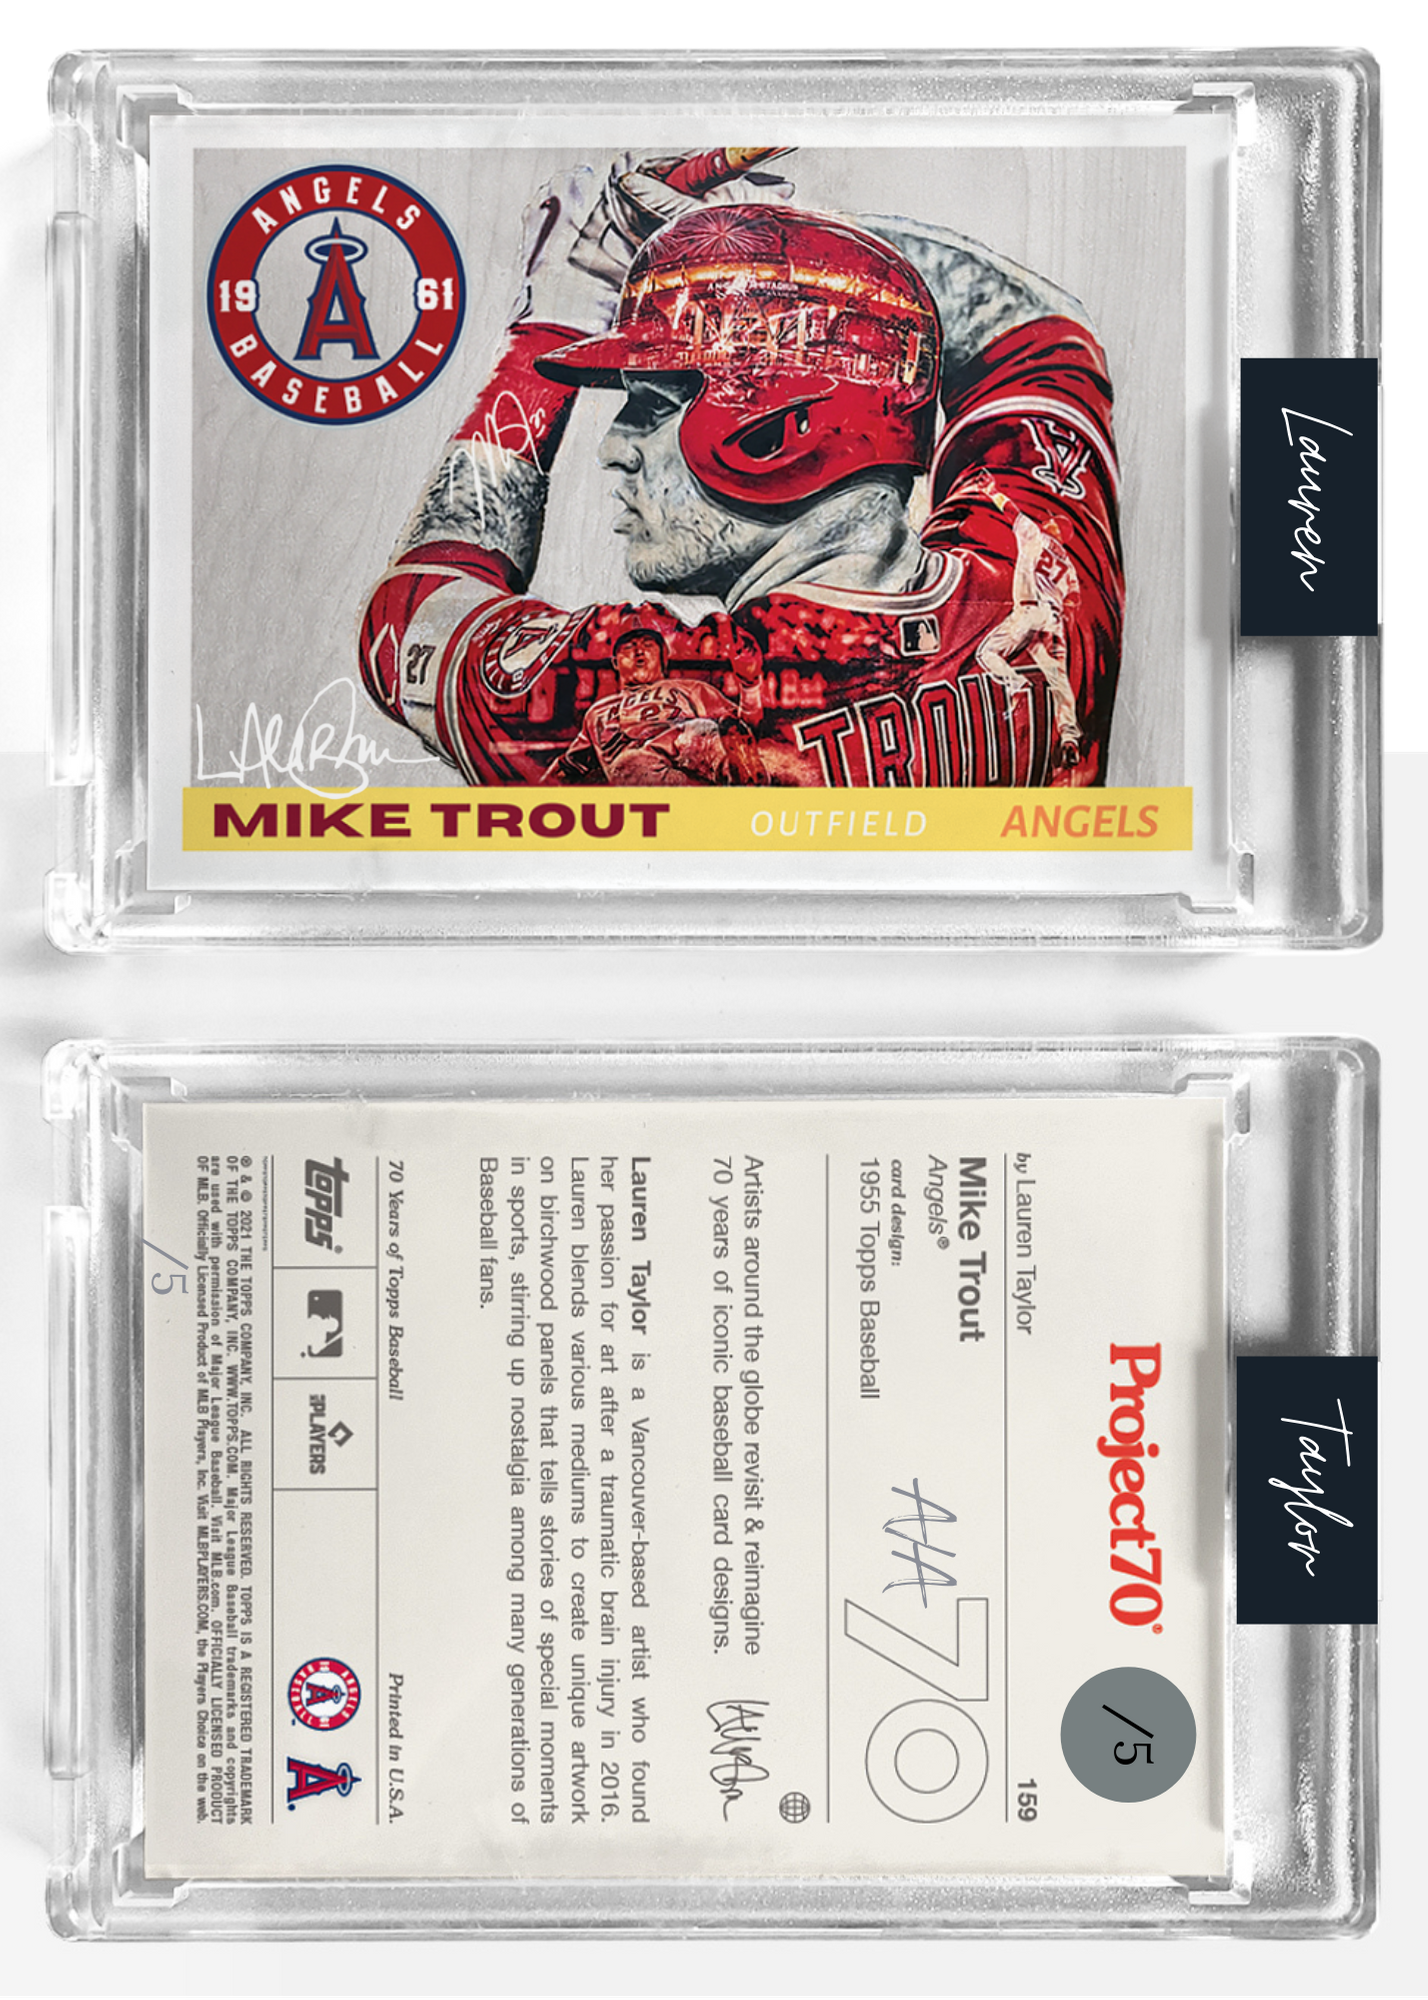 /5 Metallic Silver Artist Signature - Topps Project 70 130pt card #159 by Lauren Taylor - Mike Trout